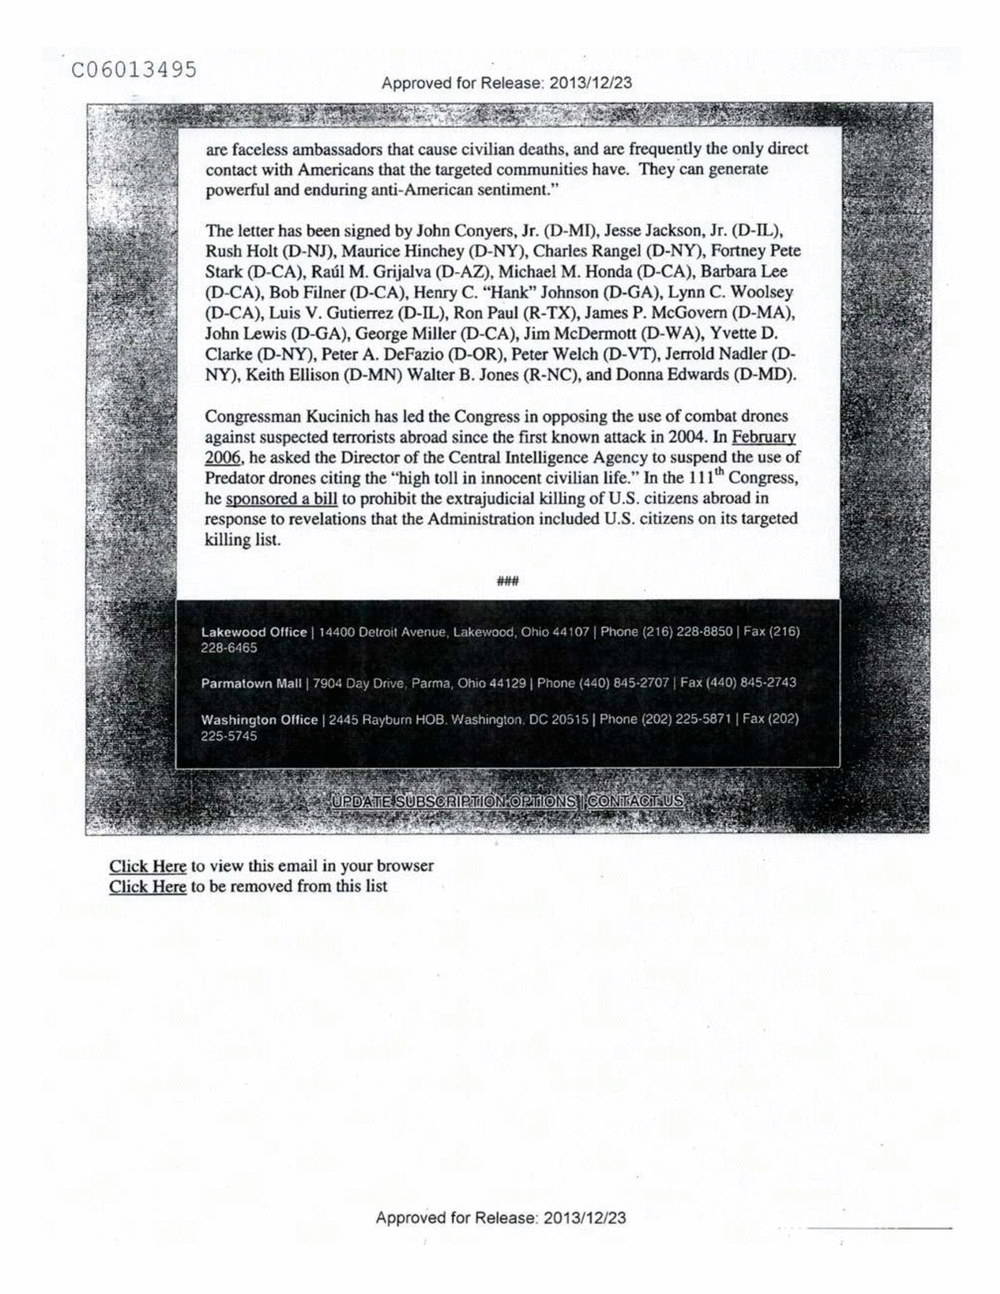 Page 349 from Email Correspondence Between Reporters and CIA Flacks